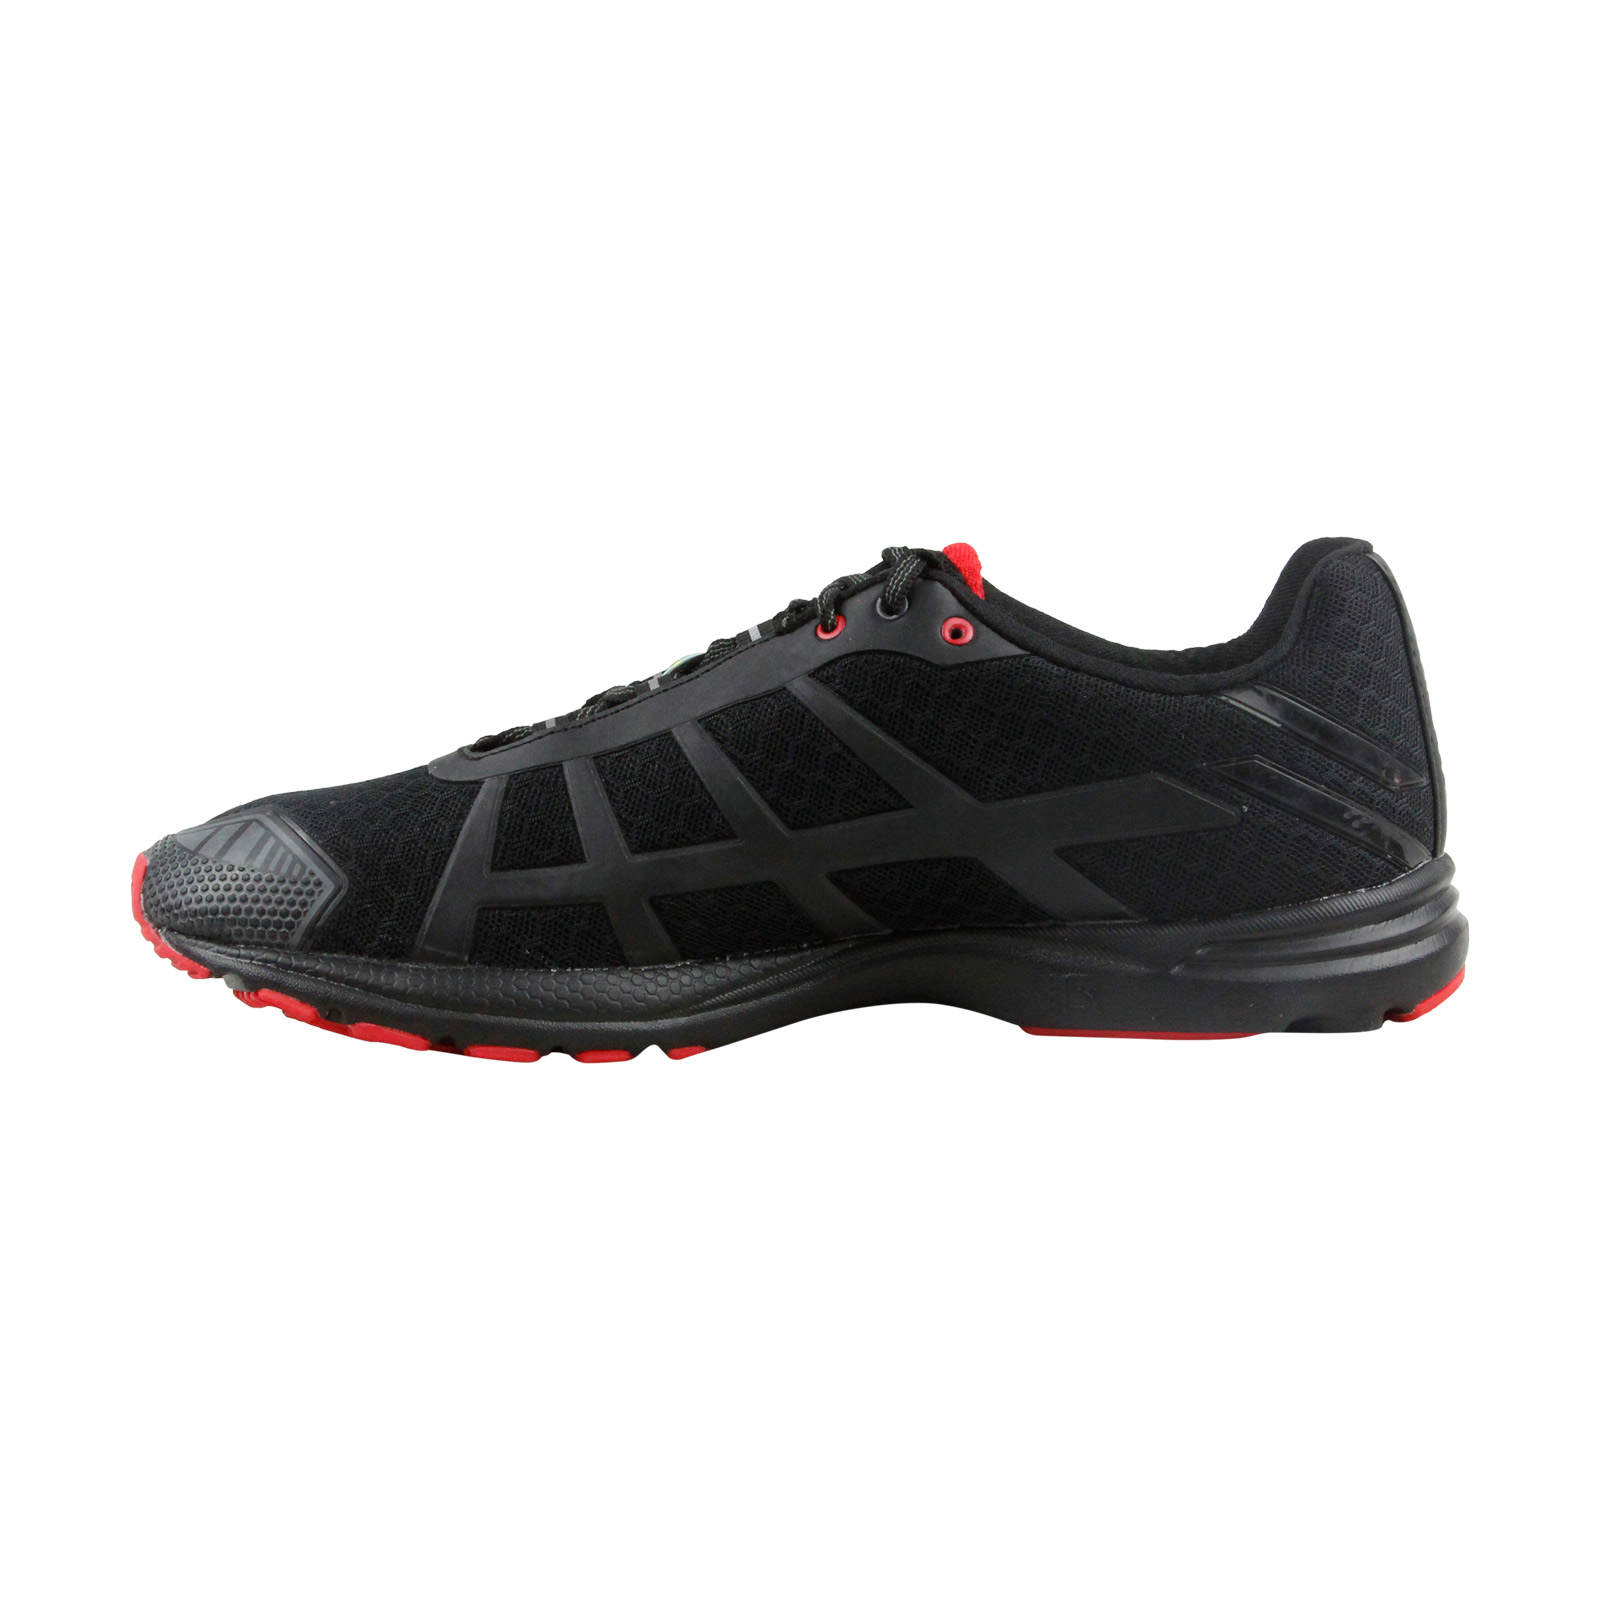 Salming Men's Distance D4 Black / Red Ankle-High Running Shoe - 12.5M - image 2 of 3